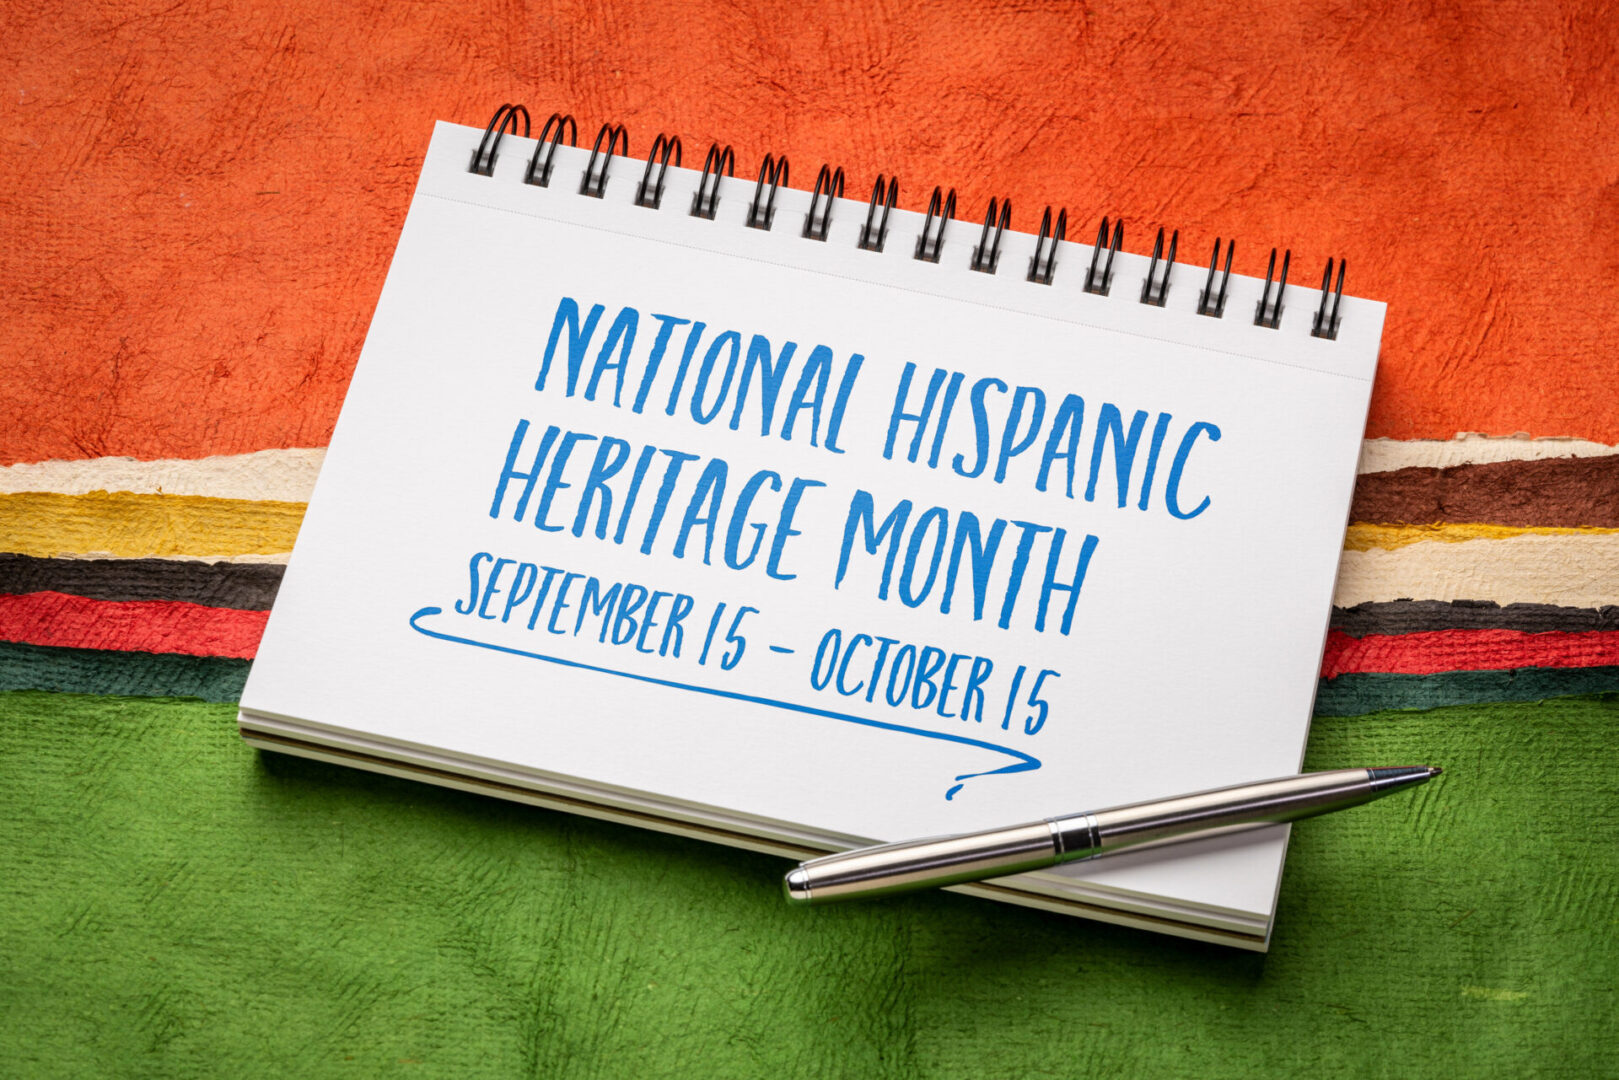 September 15 - October 15, National Hispanic Heritage Month - handwriting in in a spiral notebook against abstract landscape created with Mexican Huun paper, reminder of cultural event